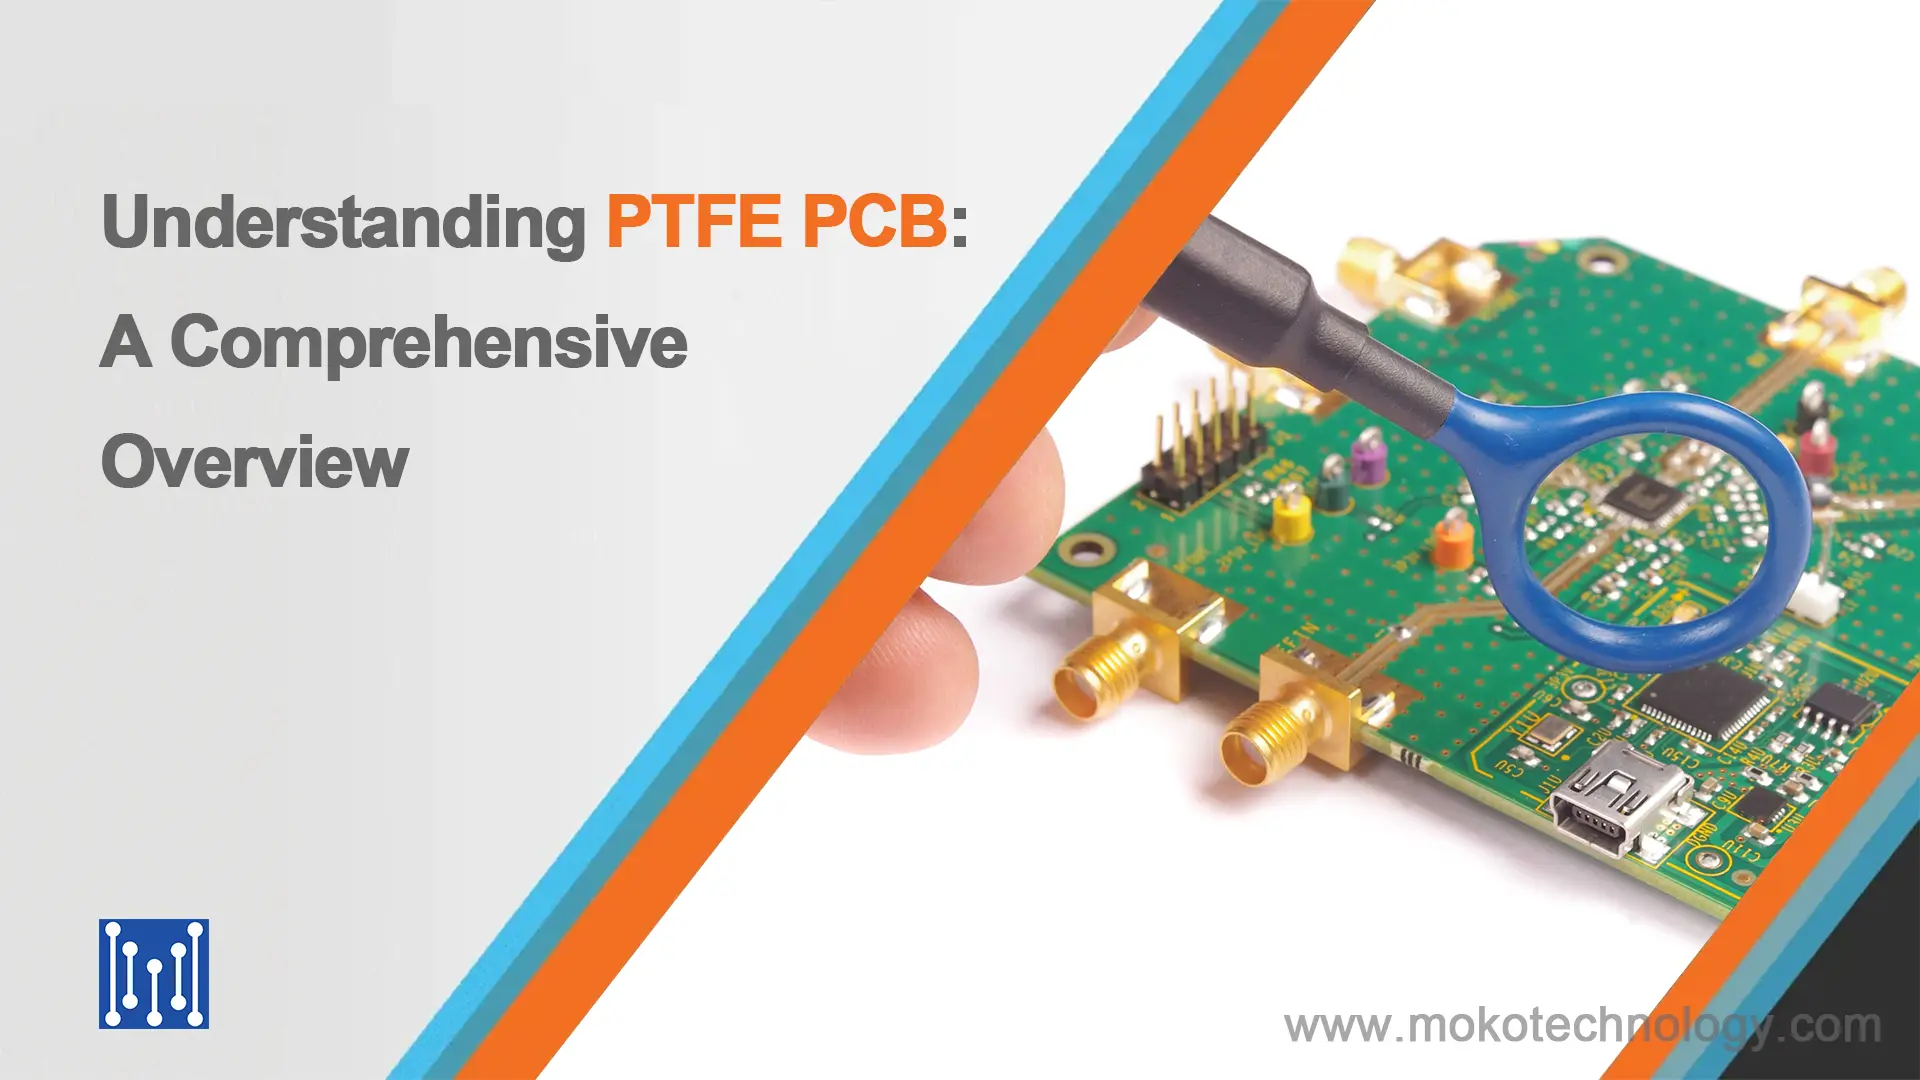 Understanding PTFE PCB: A Comprehensive Overview